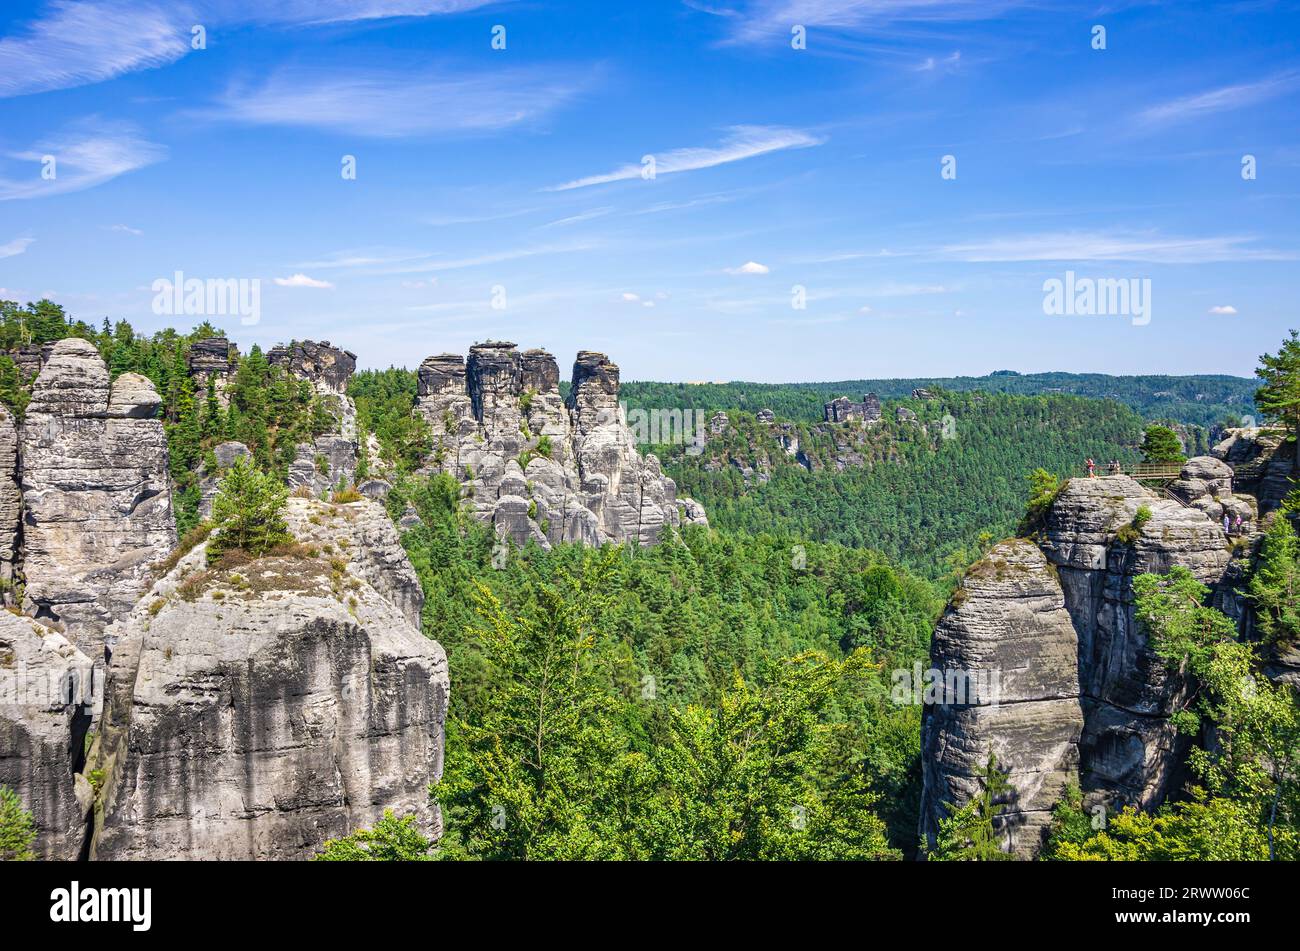 Picturesque Wehlstein View in the Bastei rock formation area, Elbe Sandstone Mountains, Saxon Switzerland, Saxony, Germany. Stock Photo